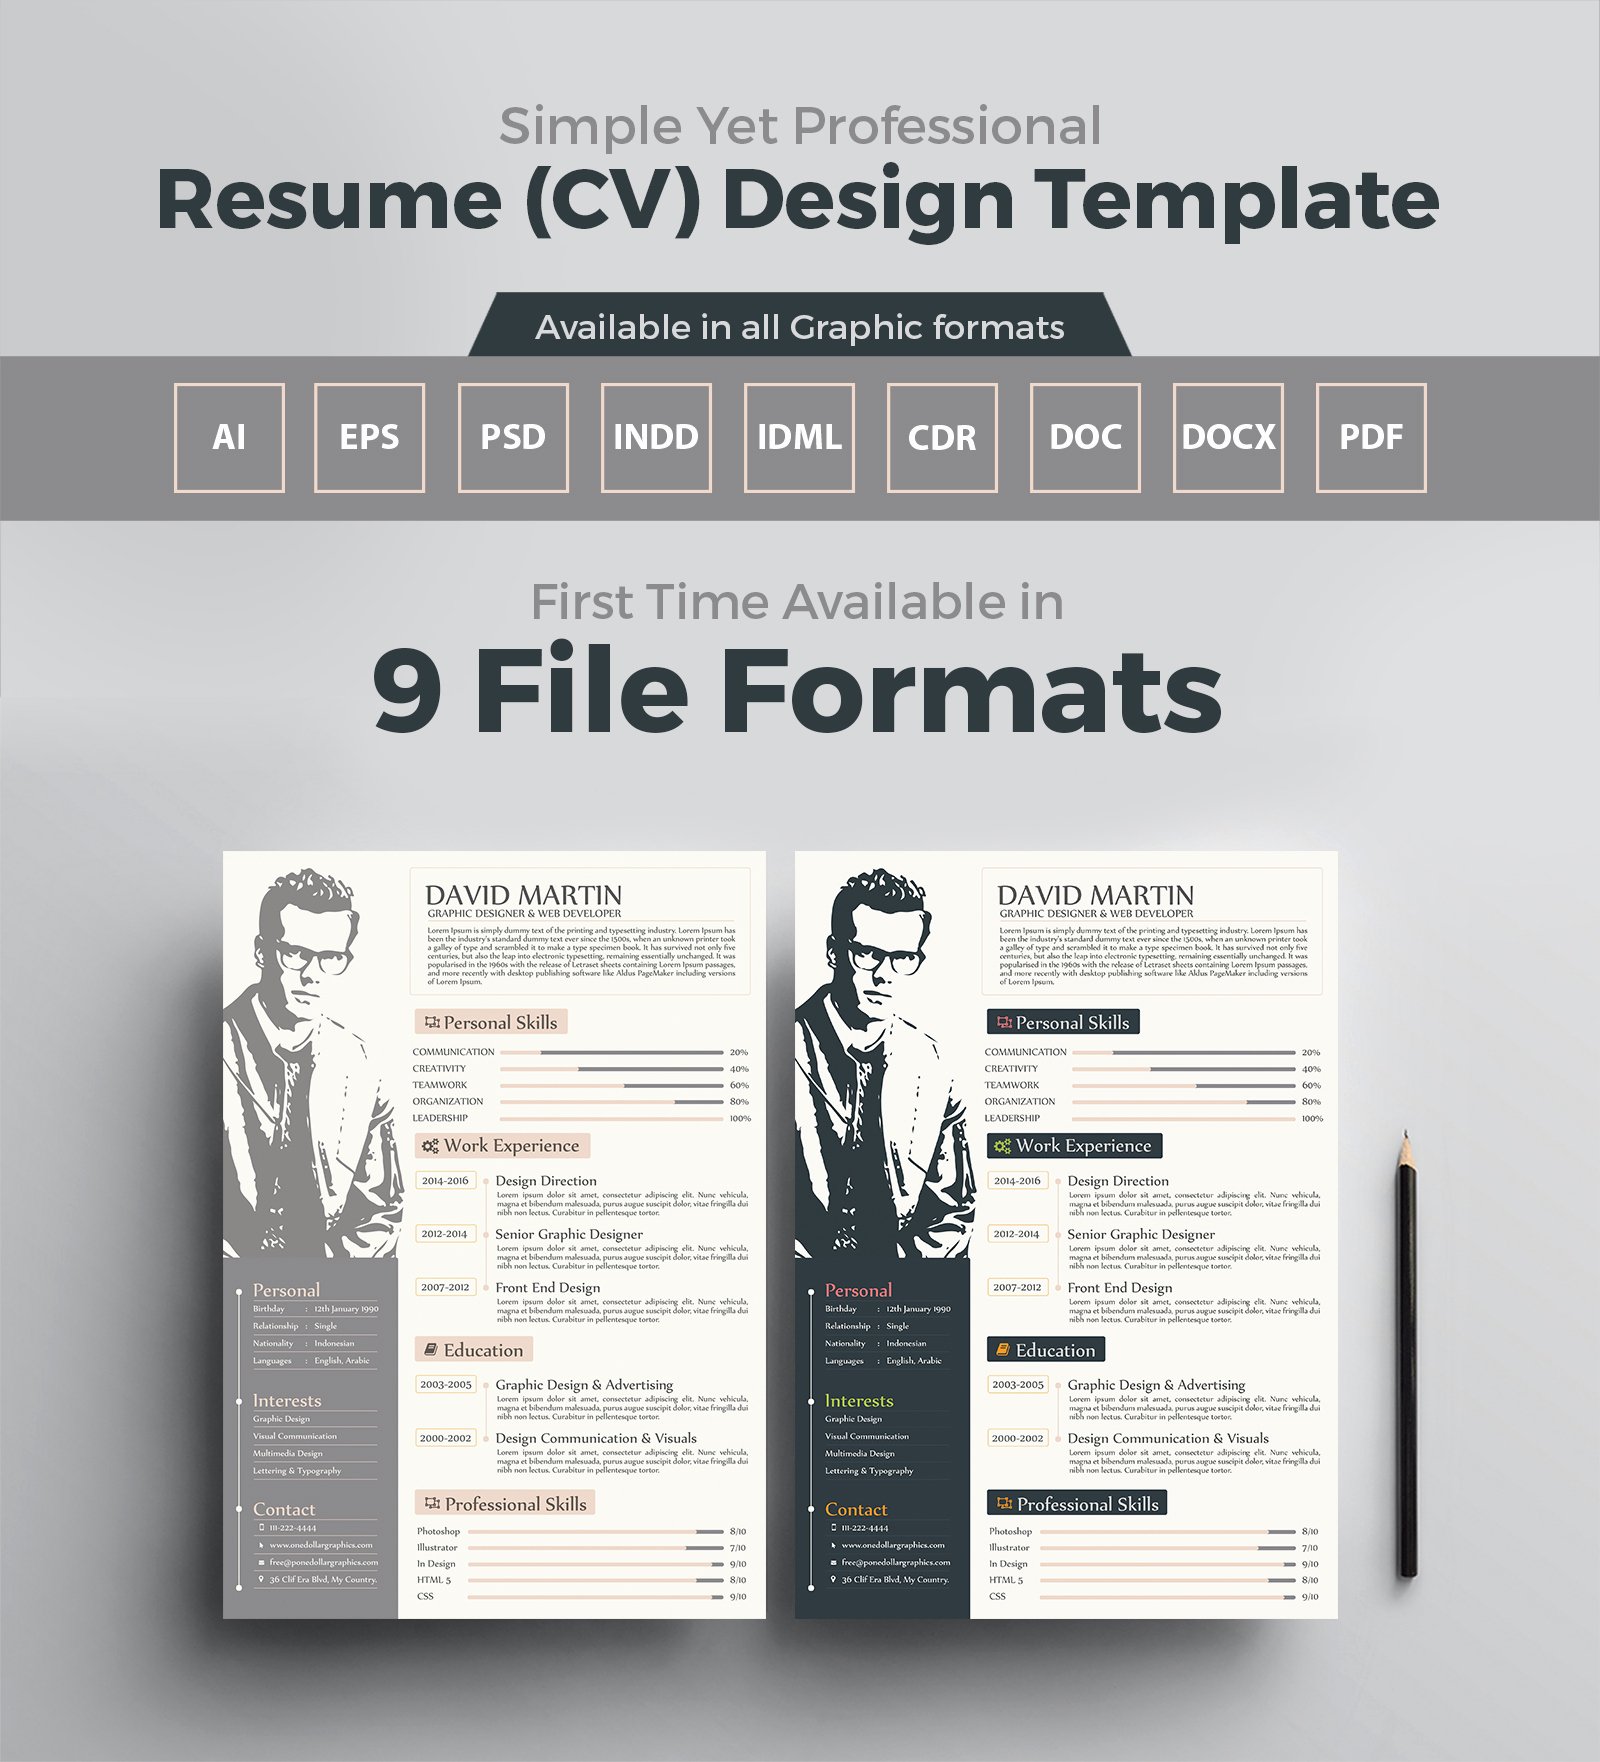 Graphic Designer Resume Pdf Best Of Simple yet Professional Resume Cv Design Templates In Ai Eps Psd Pdf Cdr Doc Docx Indd